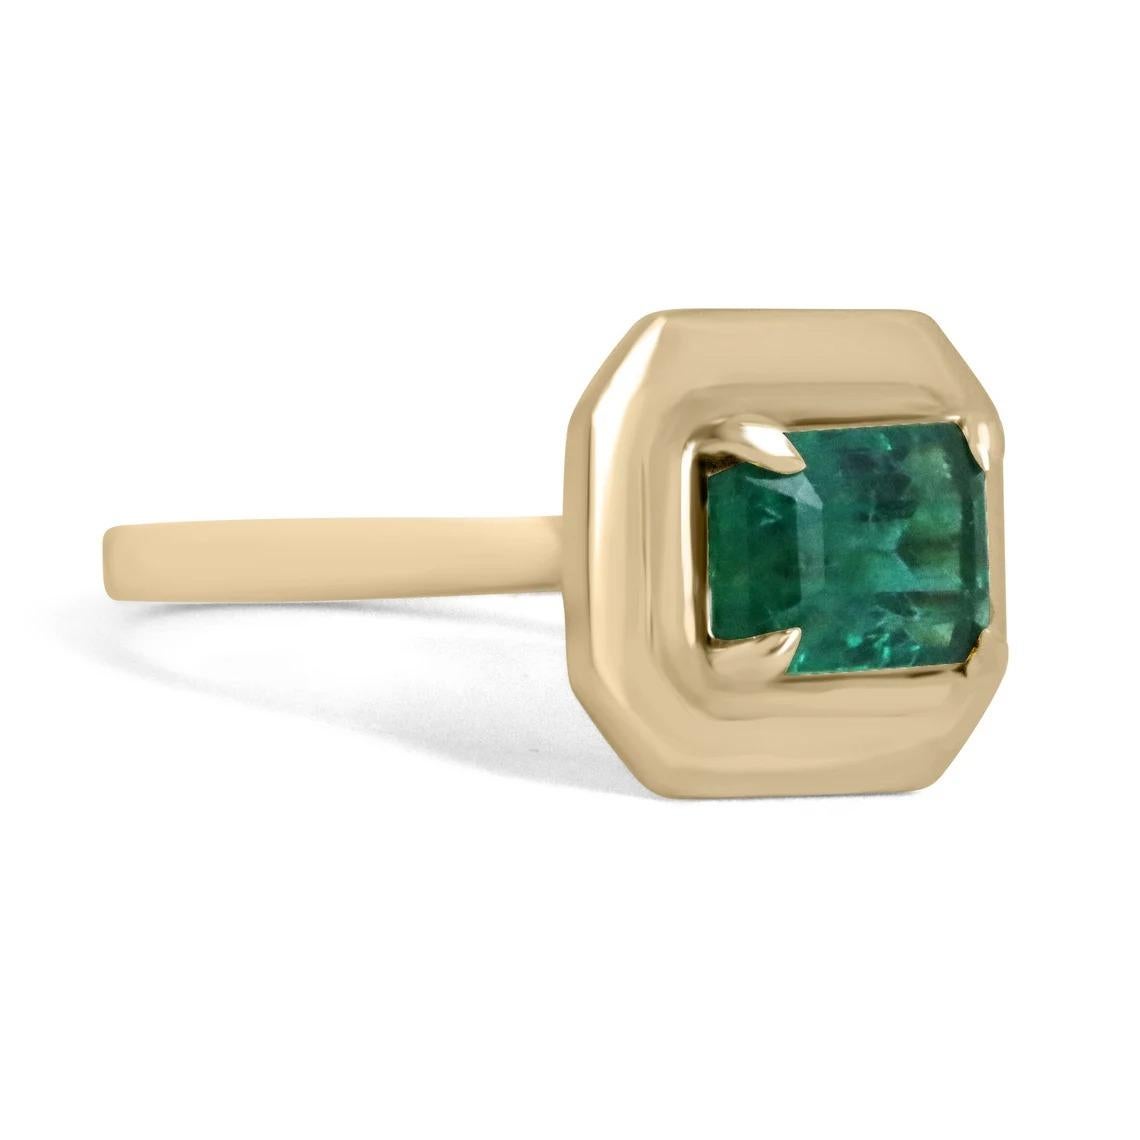 A stylish solitaire emerald ring that showcases an exquisite emerald-cut emerald set east to west. The gemstone displays the most beautiful rich forest green color with very good transparency and luster. Set in a four-prong claw setting, crafted in